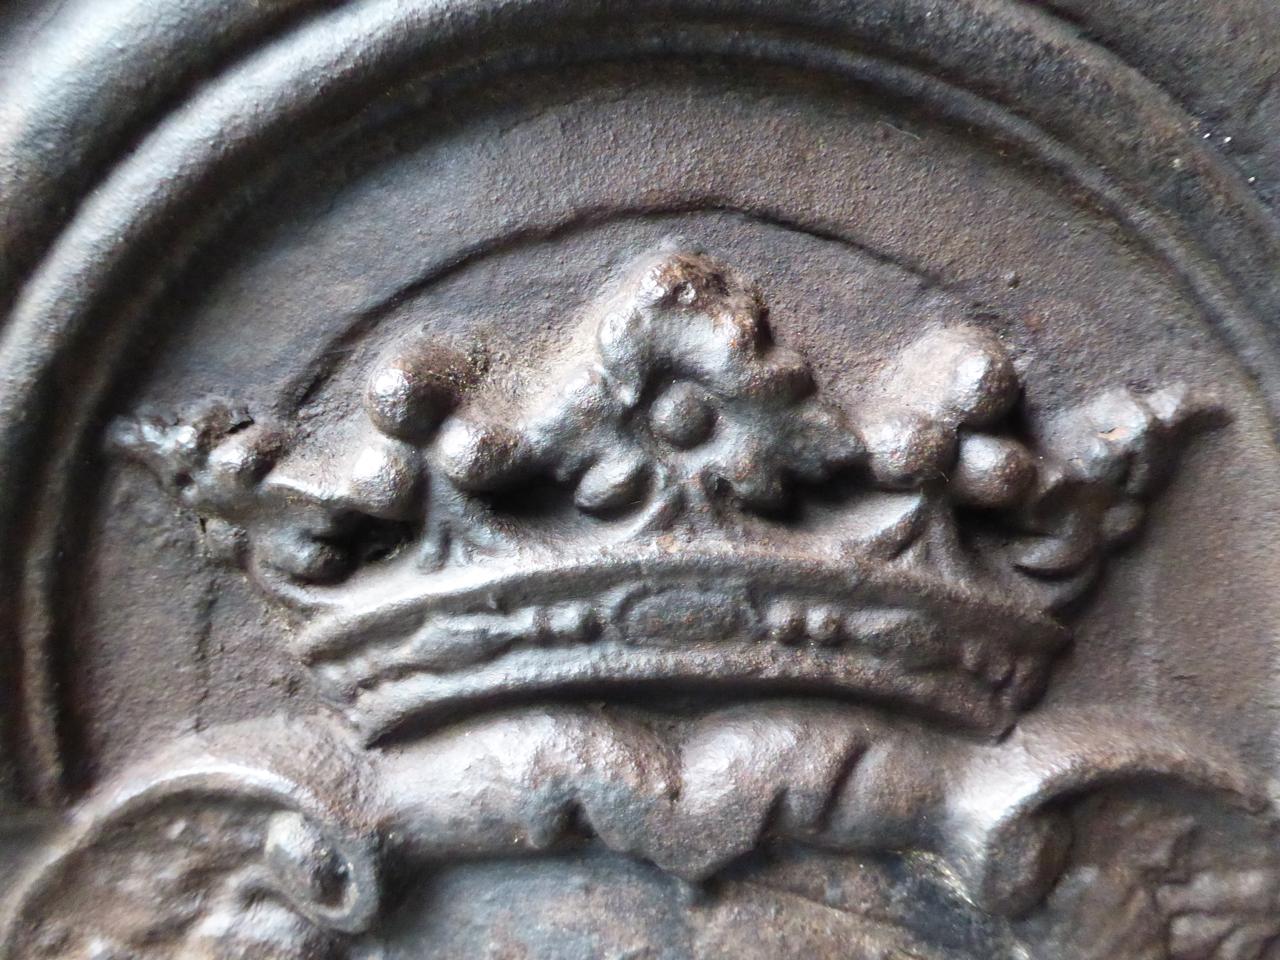 French fireback in Renaissance style with a coat of arms. The fireback is made of cast iron and has a natural brown patina. Upon request it can be made black / pewter. The condition is good, no cracks.

This product weighs more than 65 kg / 143 lbs.